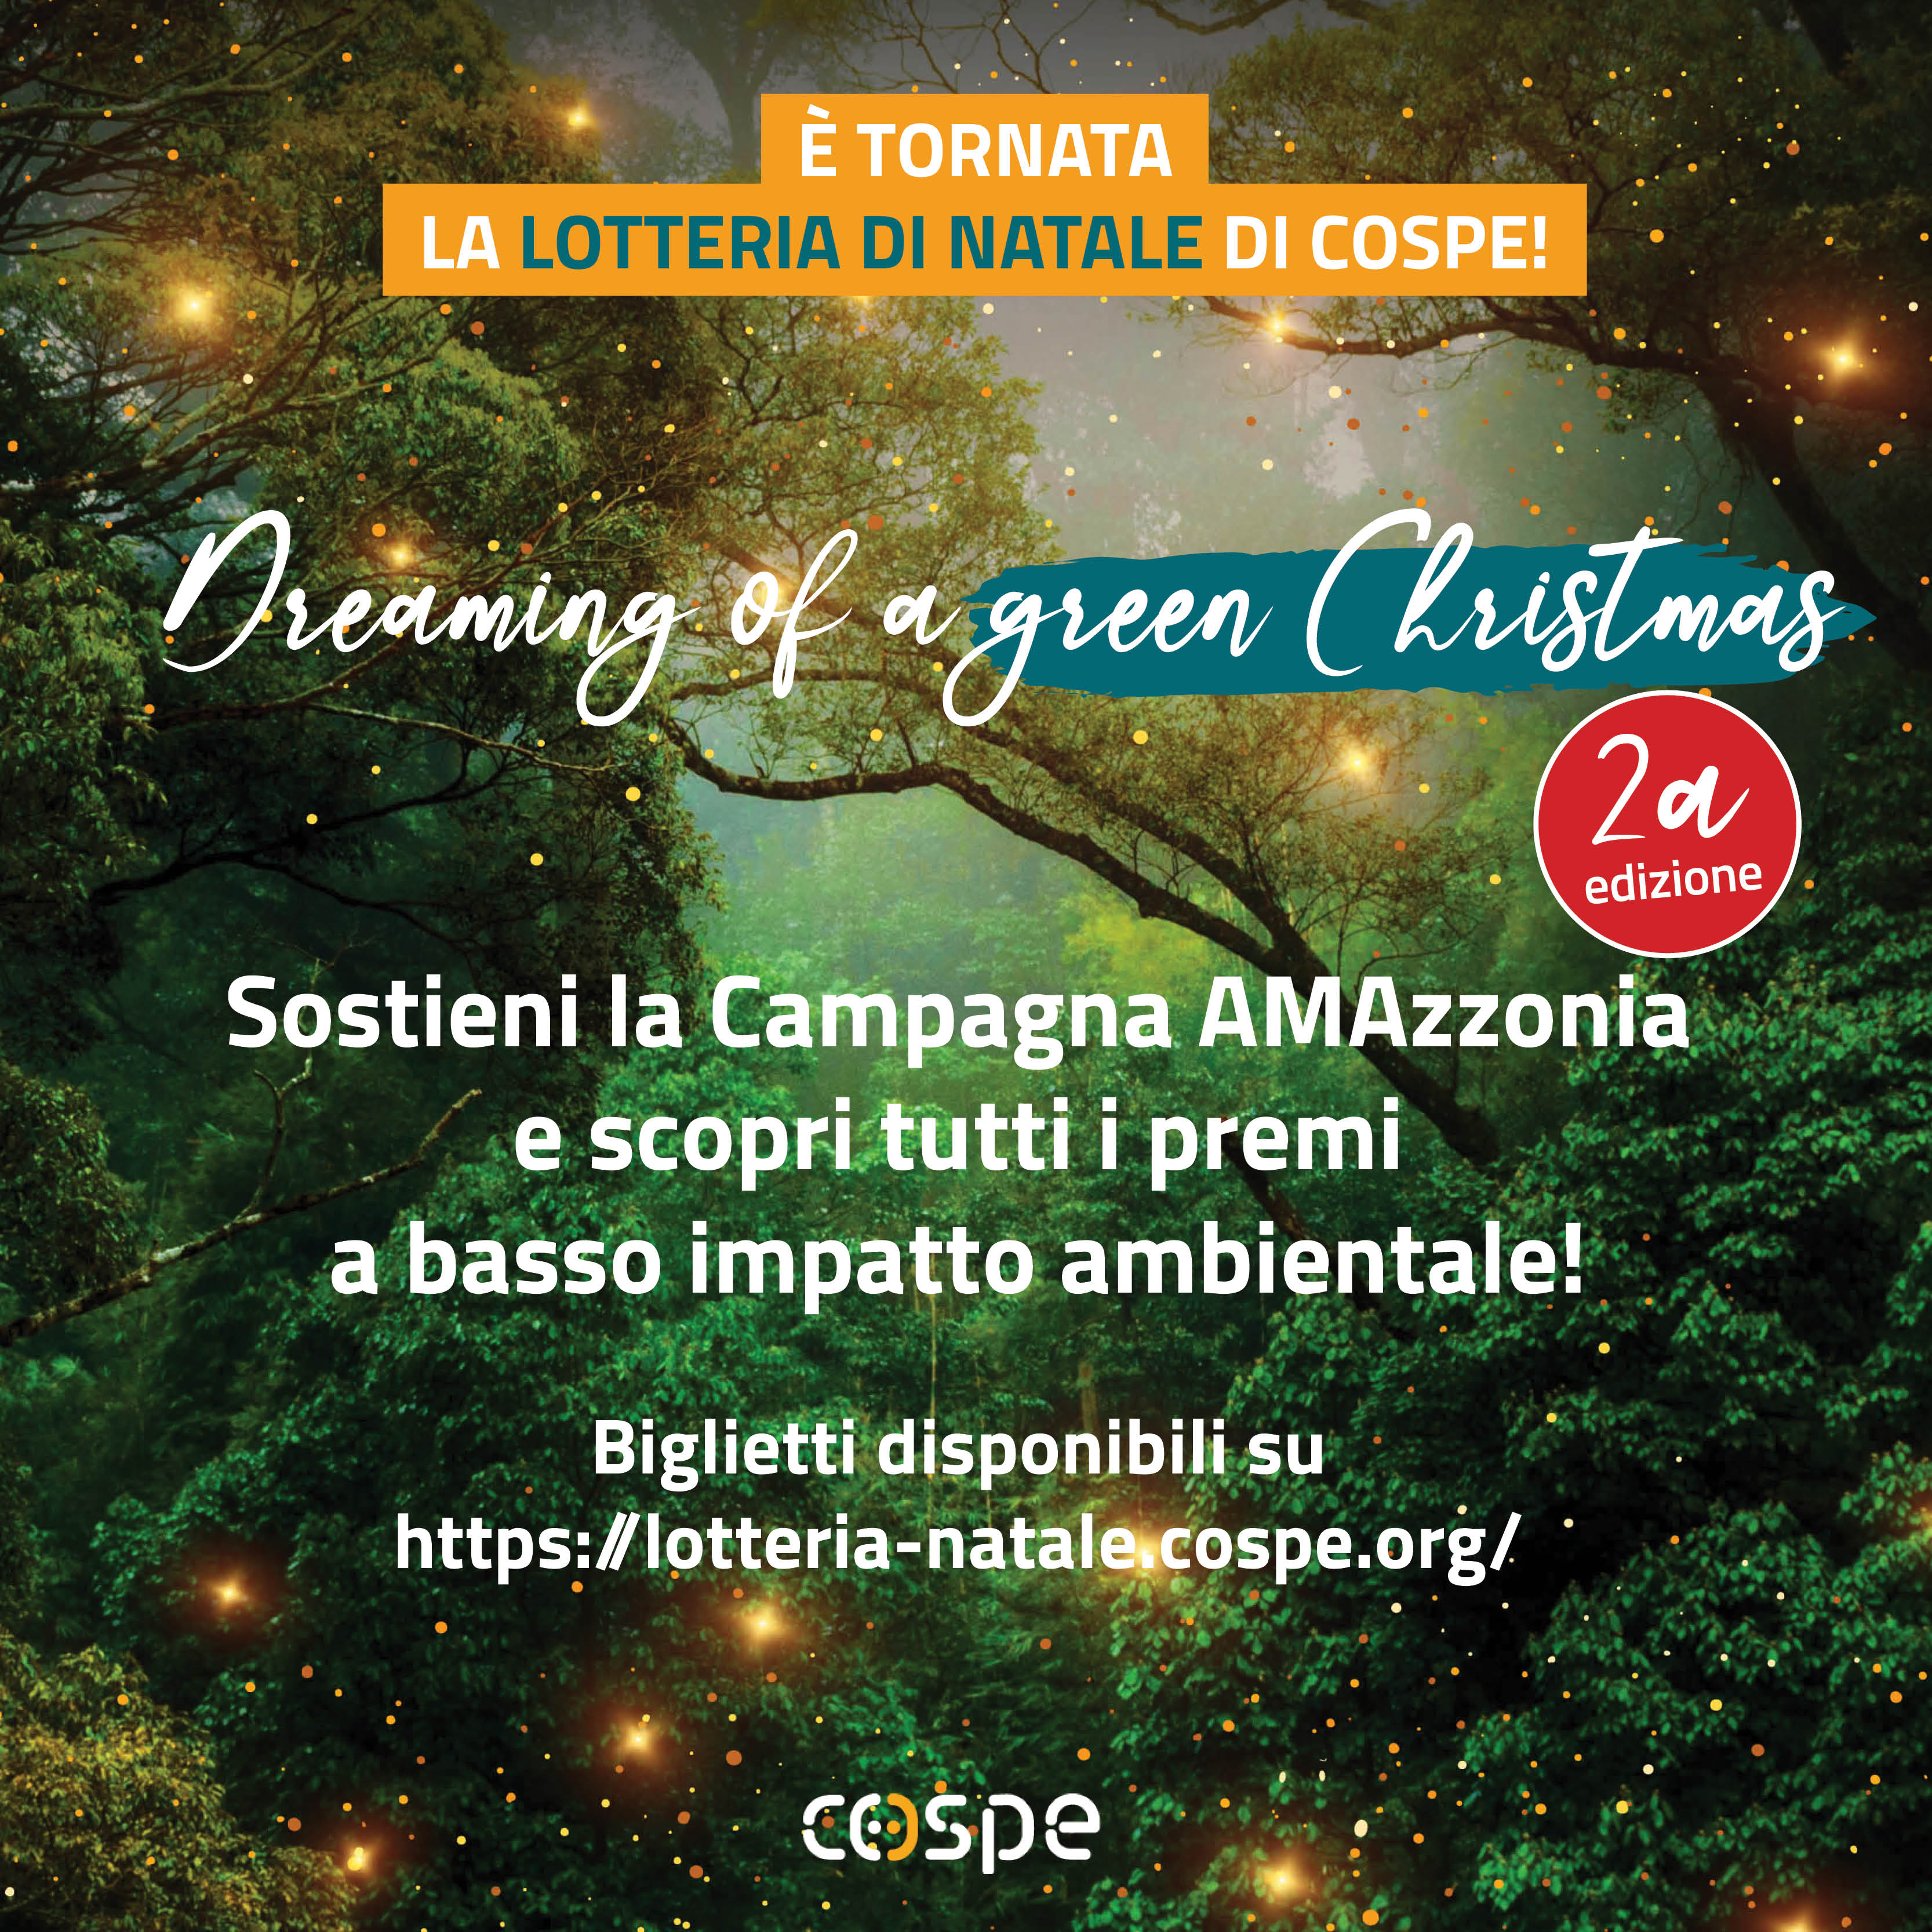 Dreaming of a Green Christmas. Lotteria di Natale COSPE